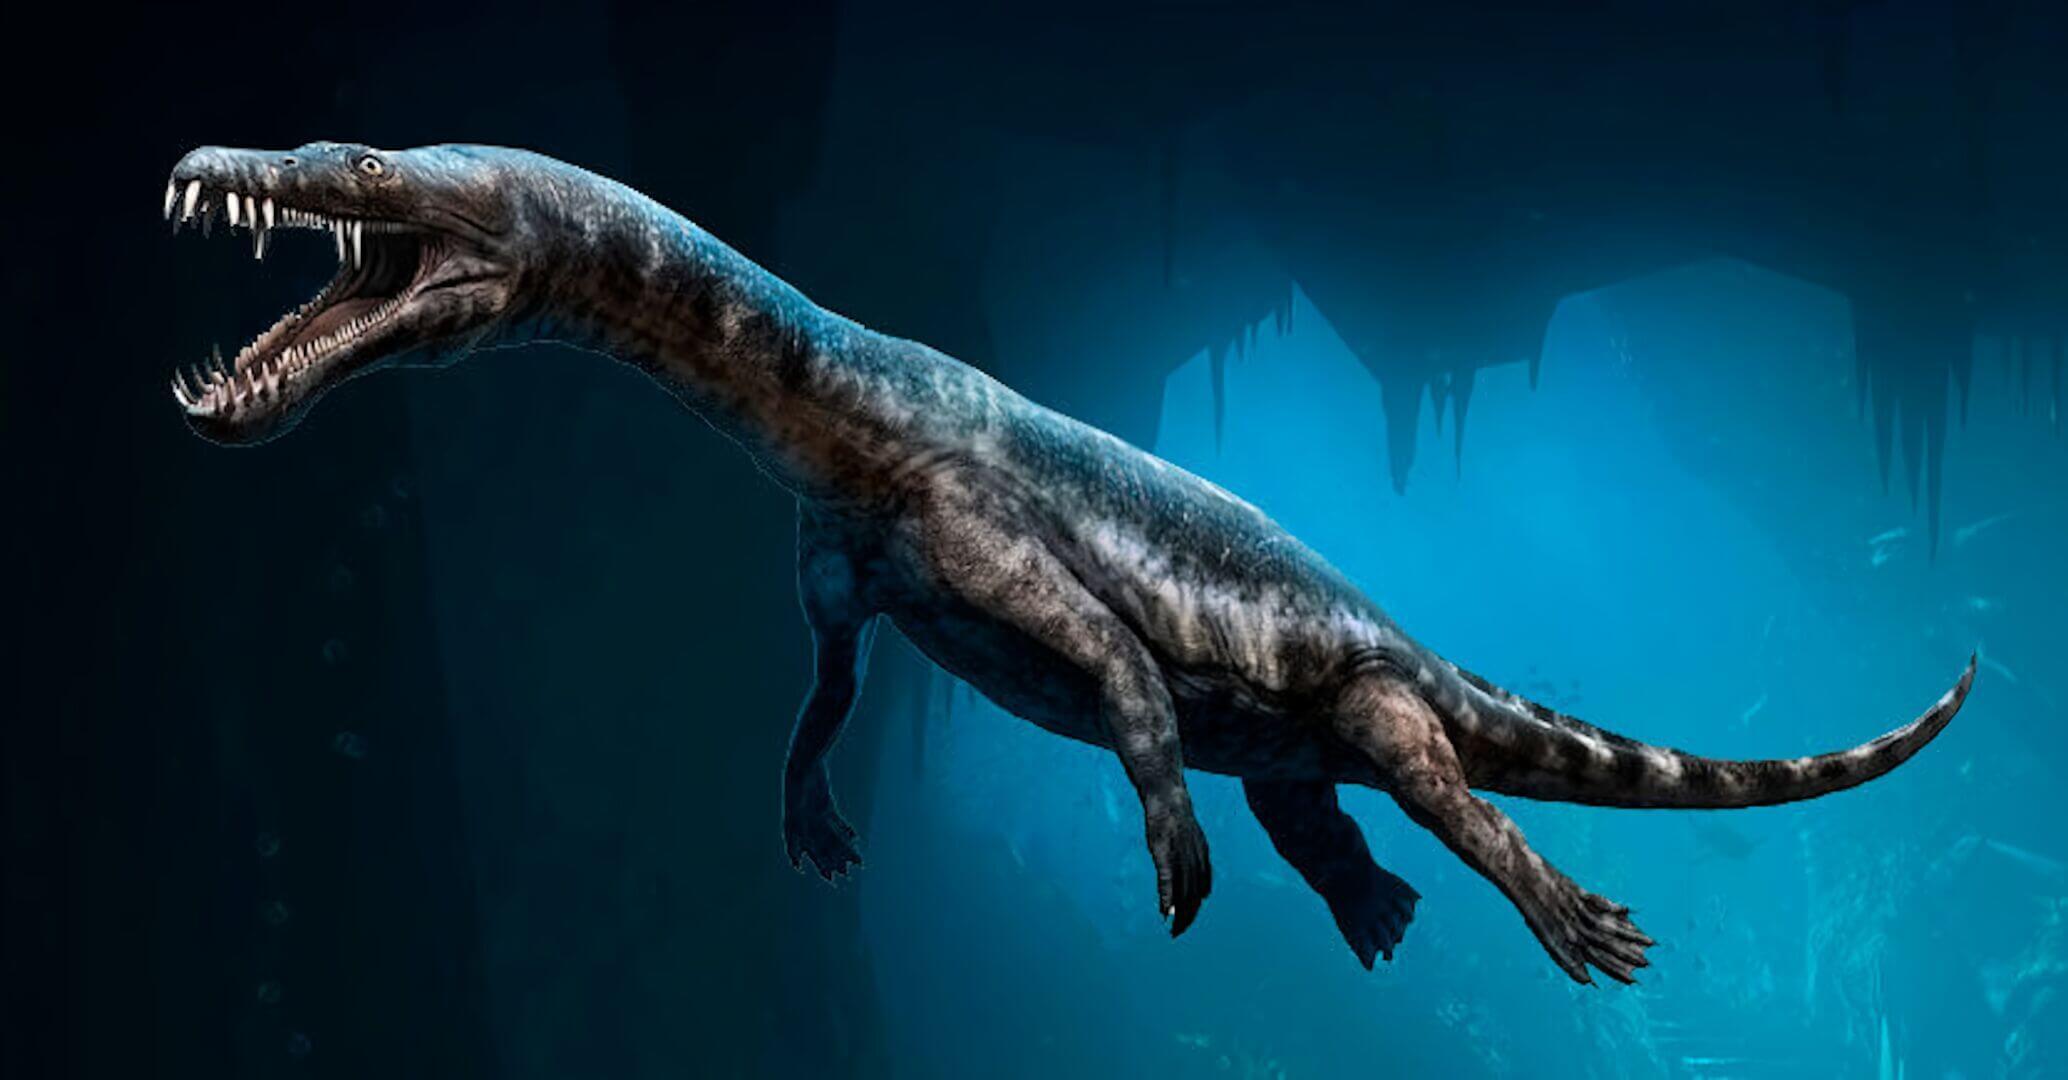 A digital illustration of a Notosaur swimming in the ocean.